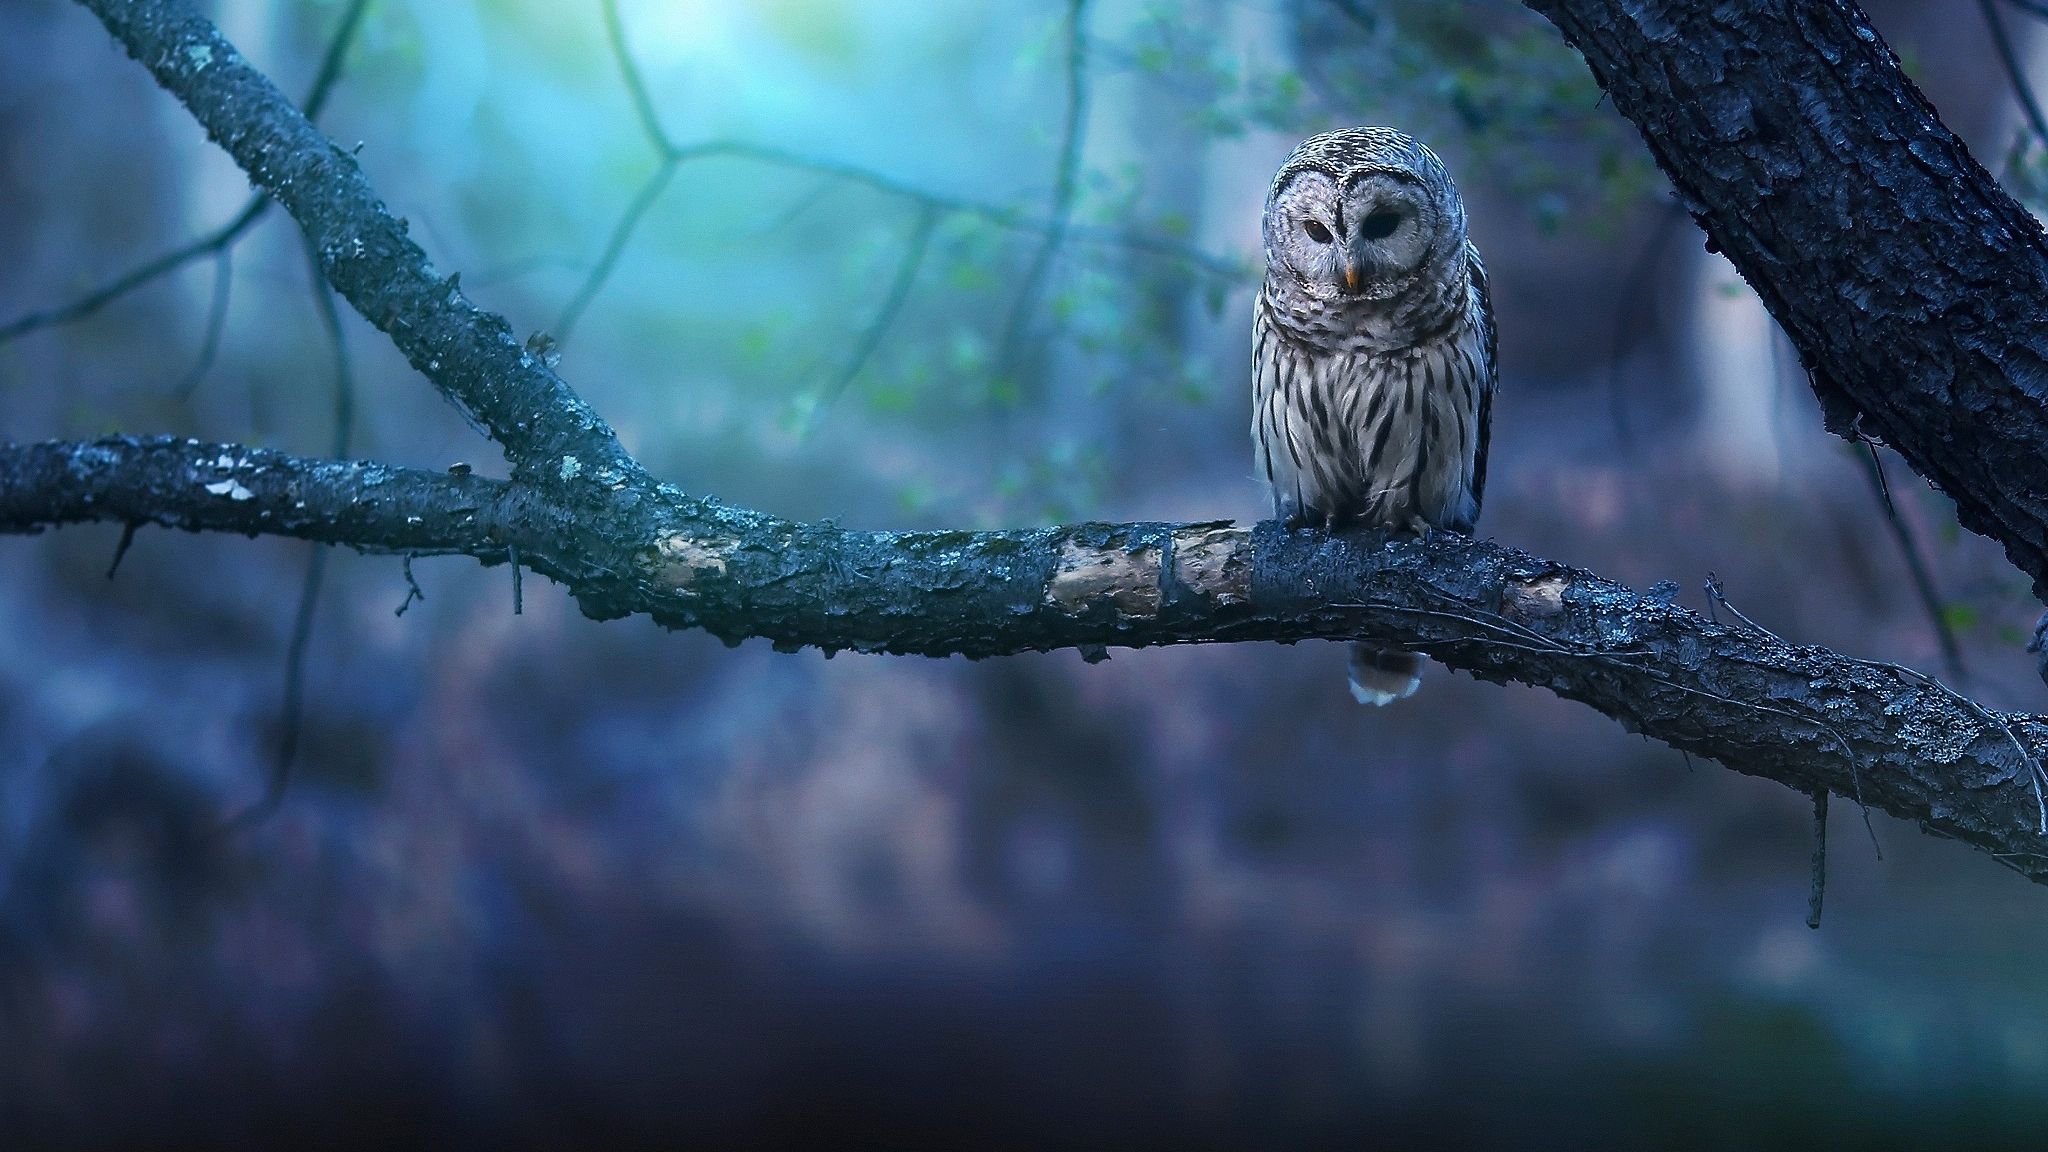 Owl Wallpapers | HD Wallpapers | ID # 27045